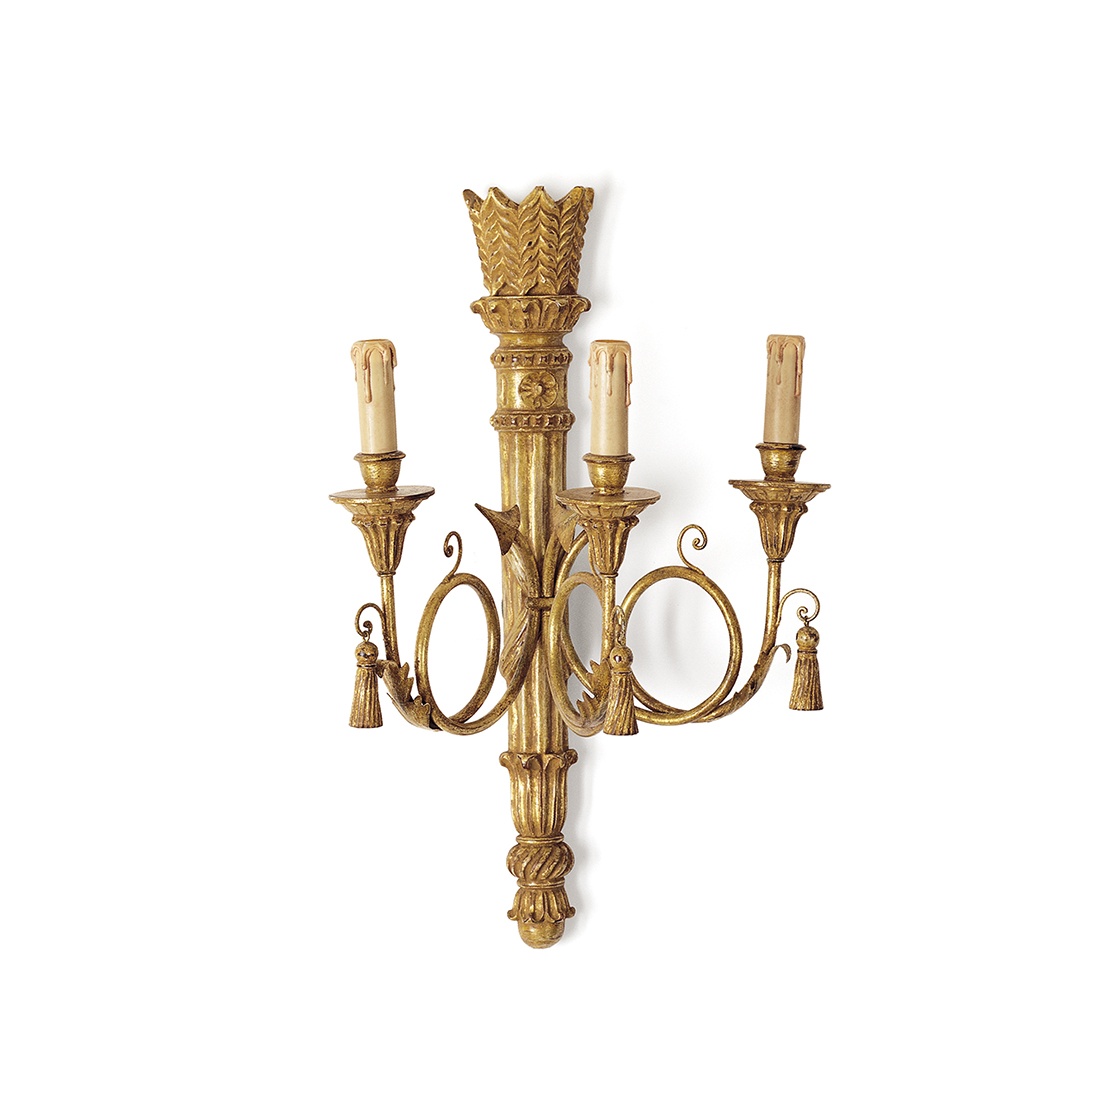 Athena wall light in Burnt gold - Beaumont & Fletcher